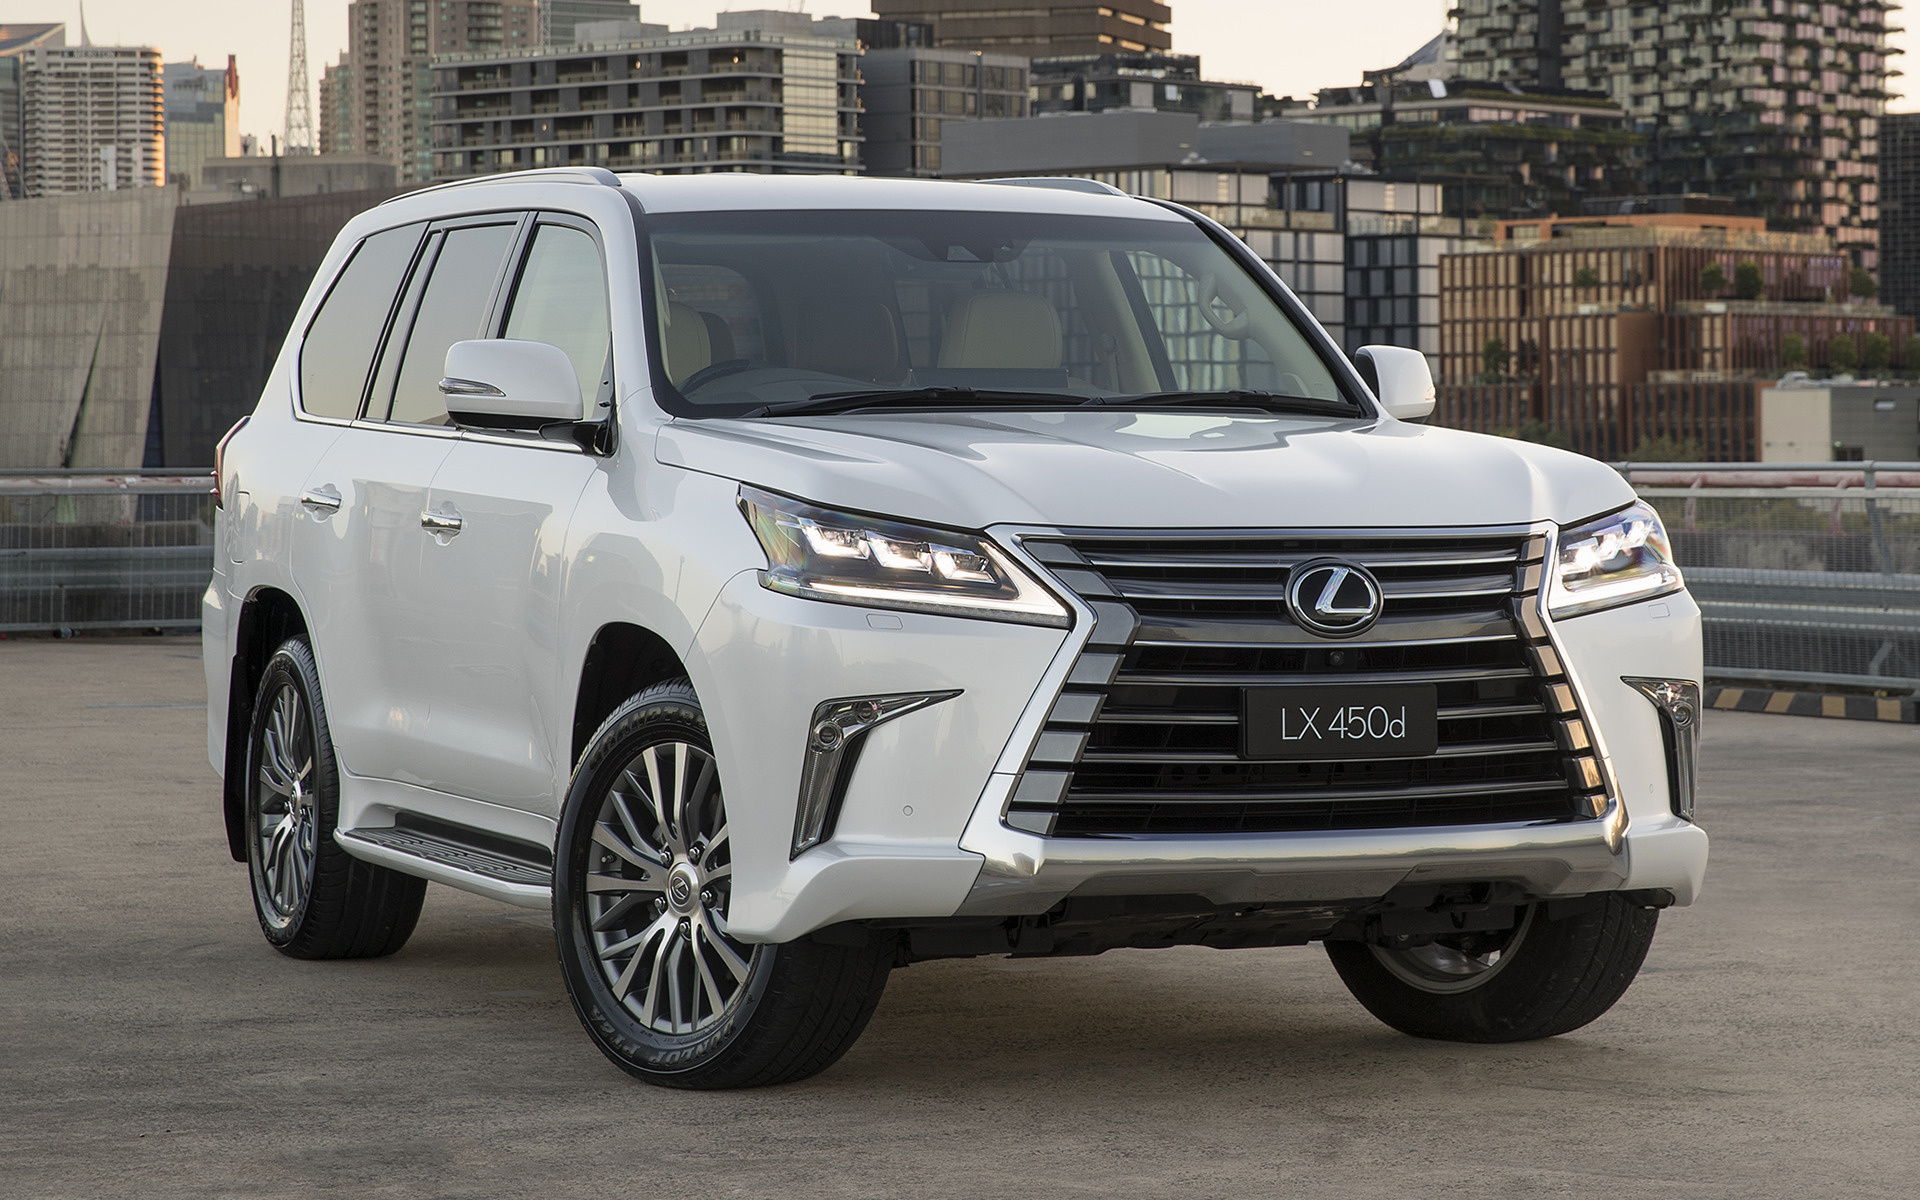 2018 Lexus LX Two-Row (AU) - Wallpapers and HD Images | Car Pixel